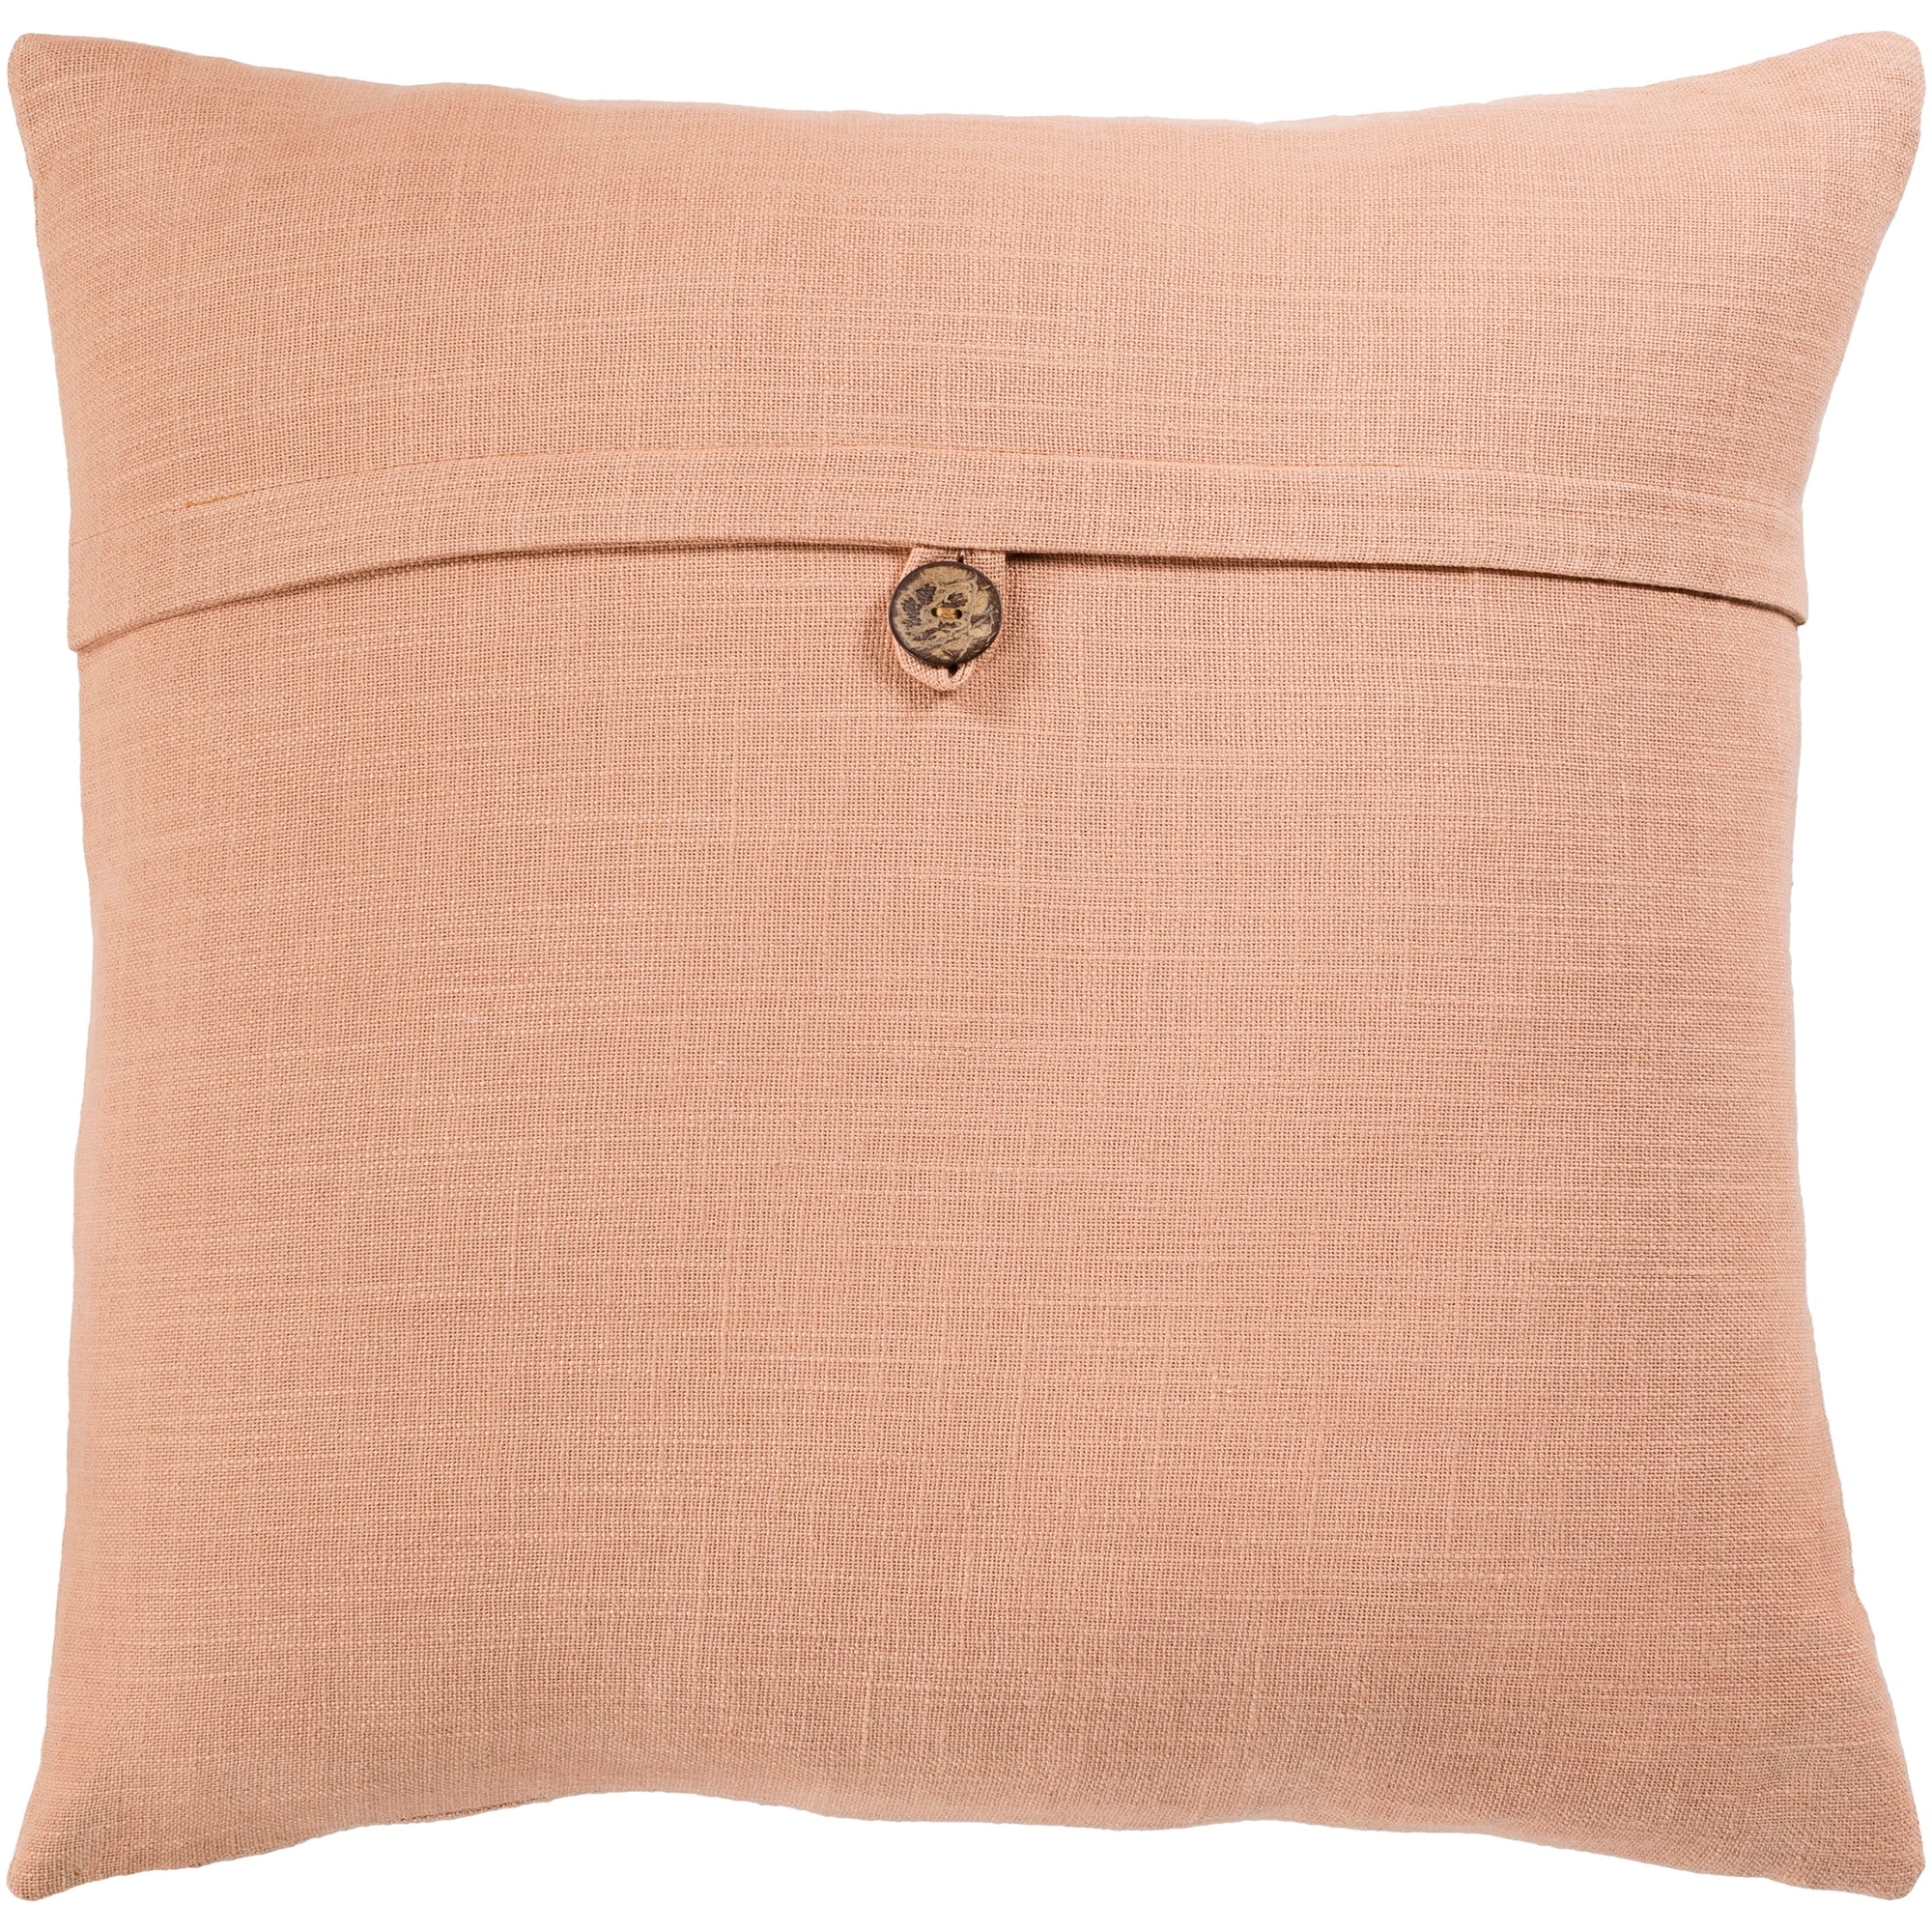 Artistic Weavers Demetra Traditional Button Tan Throw Pillow Cover 20-inch